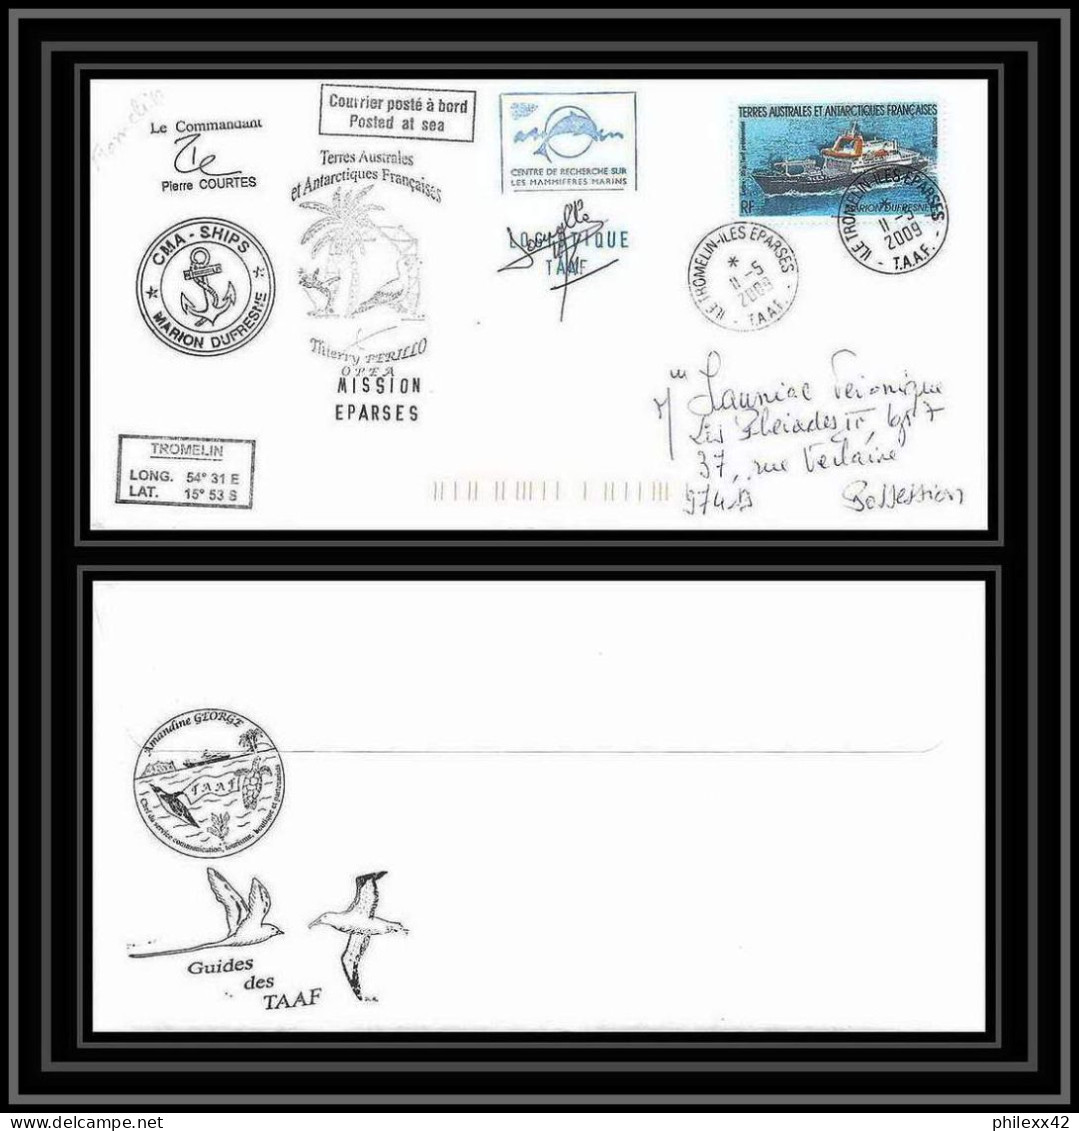 2912 Dufresne 2 Signé Signed Trommelin 11/5/2009 Mission Eparses N°520 ANTARCTIC Terres Australes (taaf) Lettre Cover - Covers & Documents